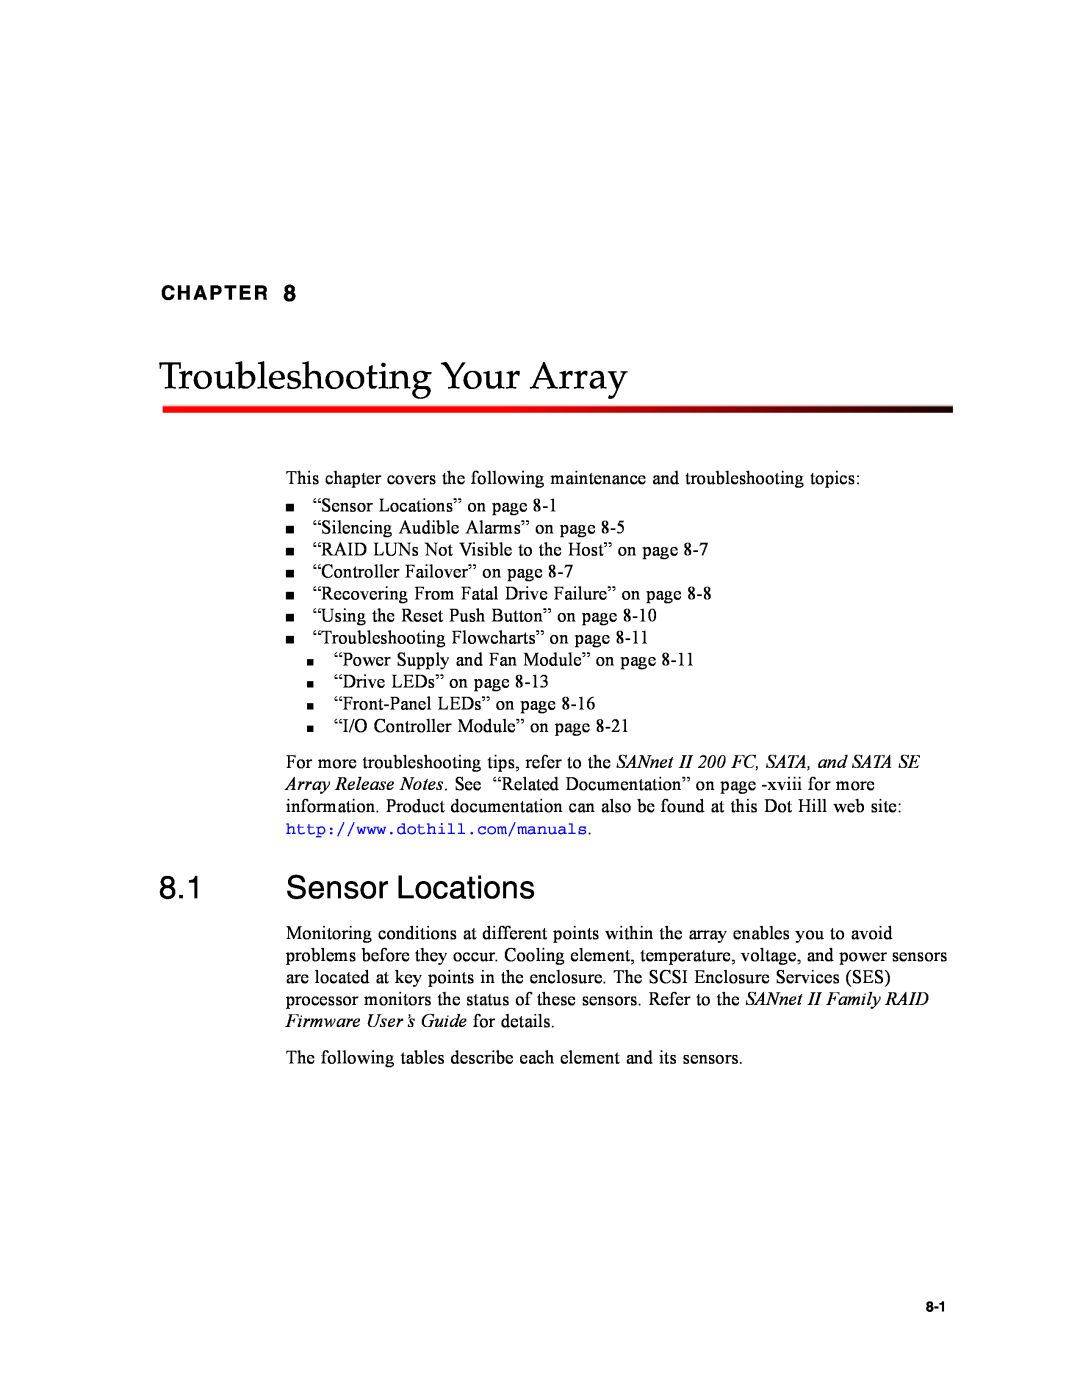 Dot Hill Systems II 200 FC service manual Troubleshooting Your Array, Sensor Locations, Chapter 